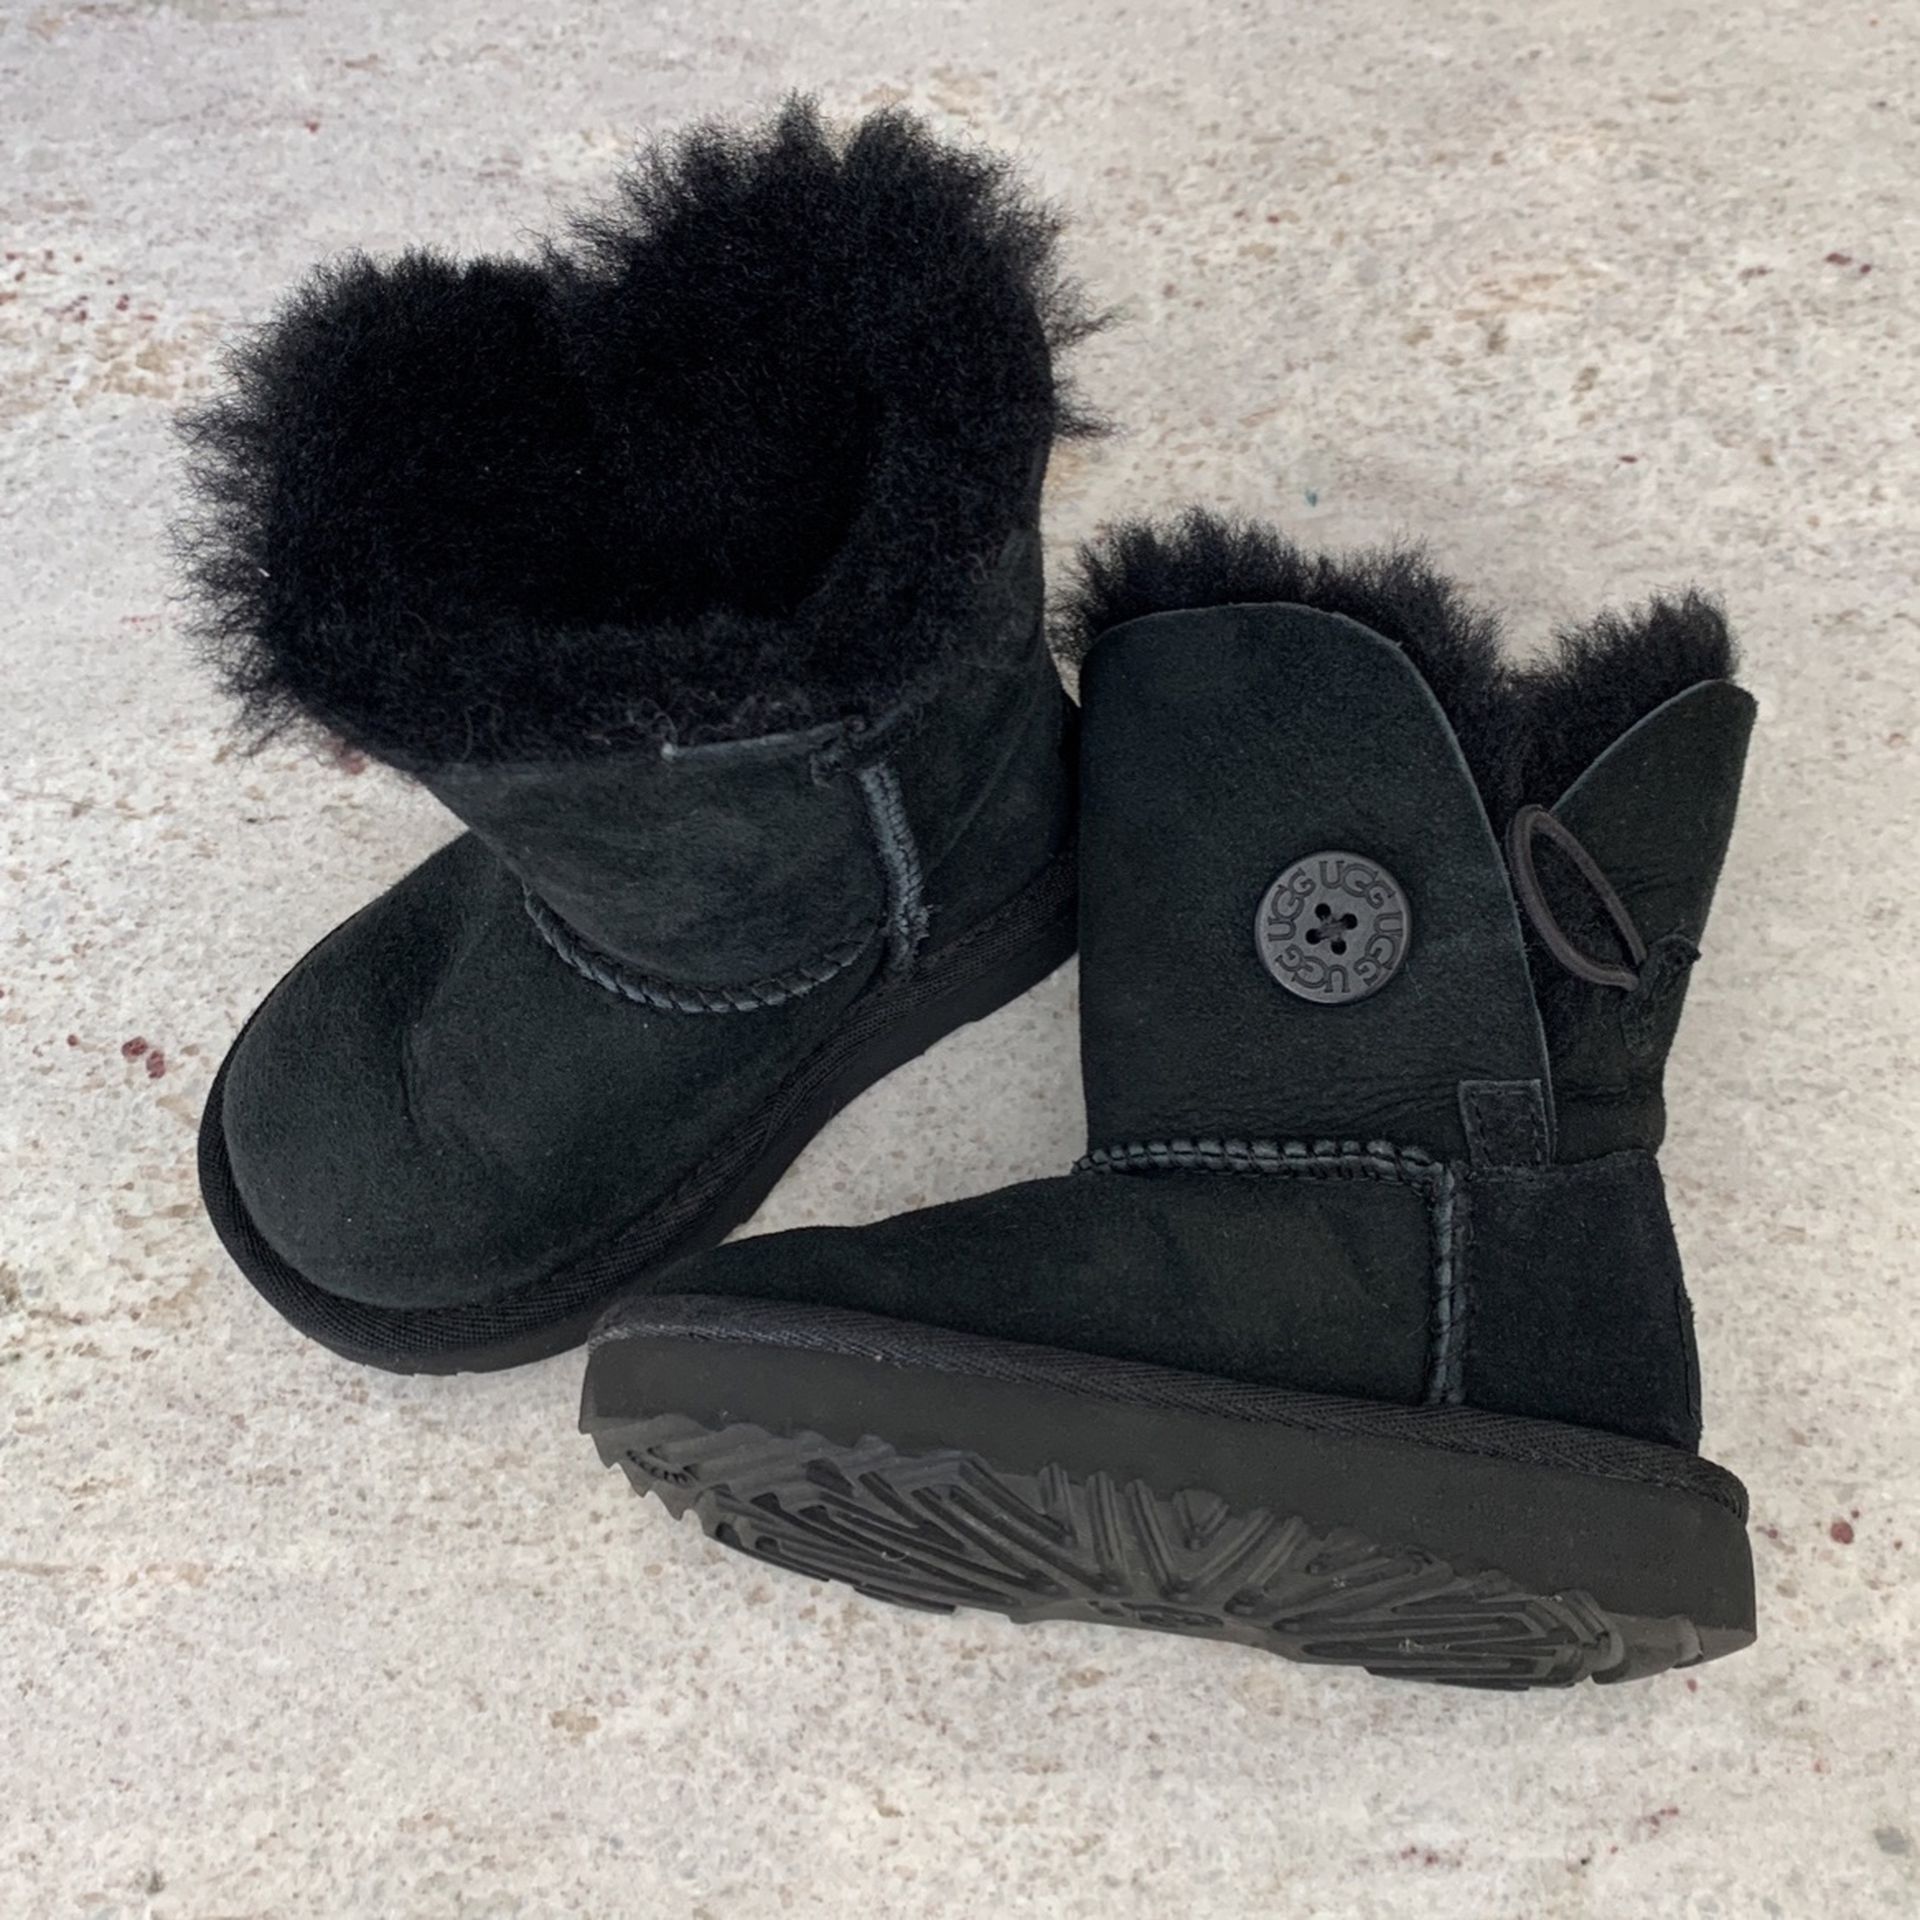 Toddler UGG Snow boots